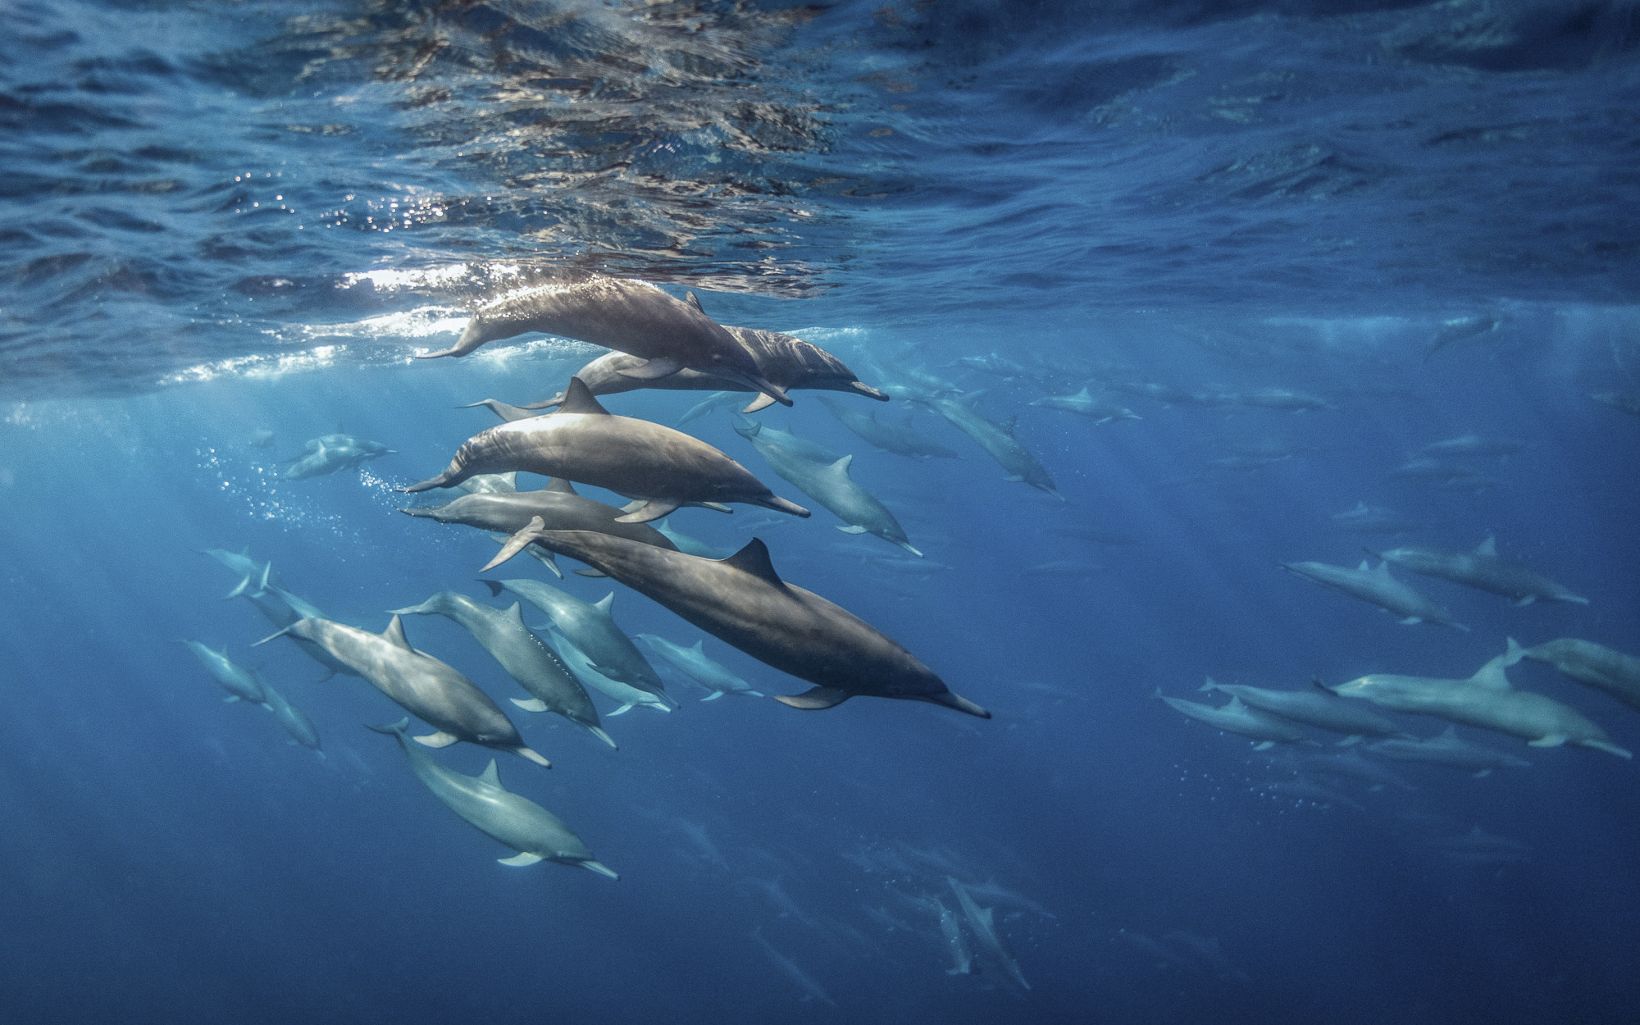 Sea dive social. Did you know hundreds of spinners dolphins live within the Costa Rica Pacific Ocean? That makes protecting habitat like this around the world vital. © David Garcia 